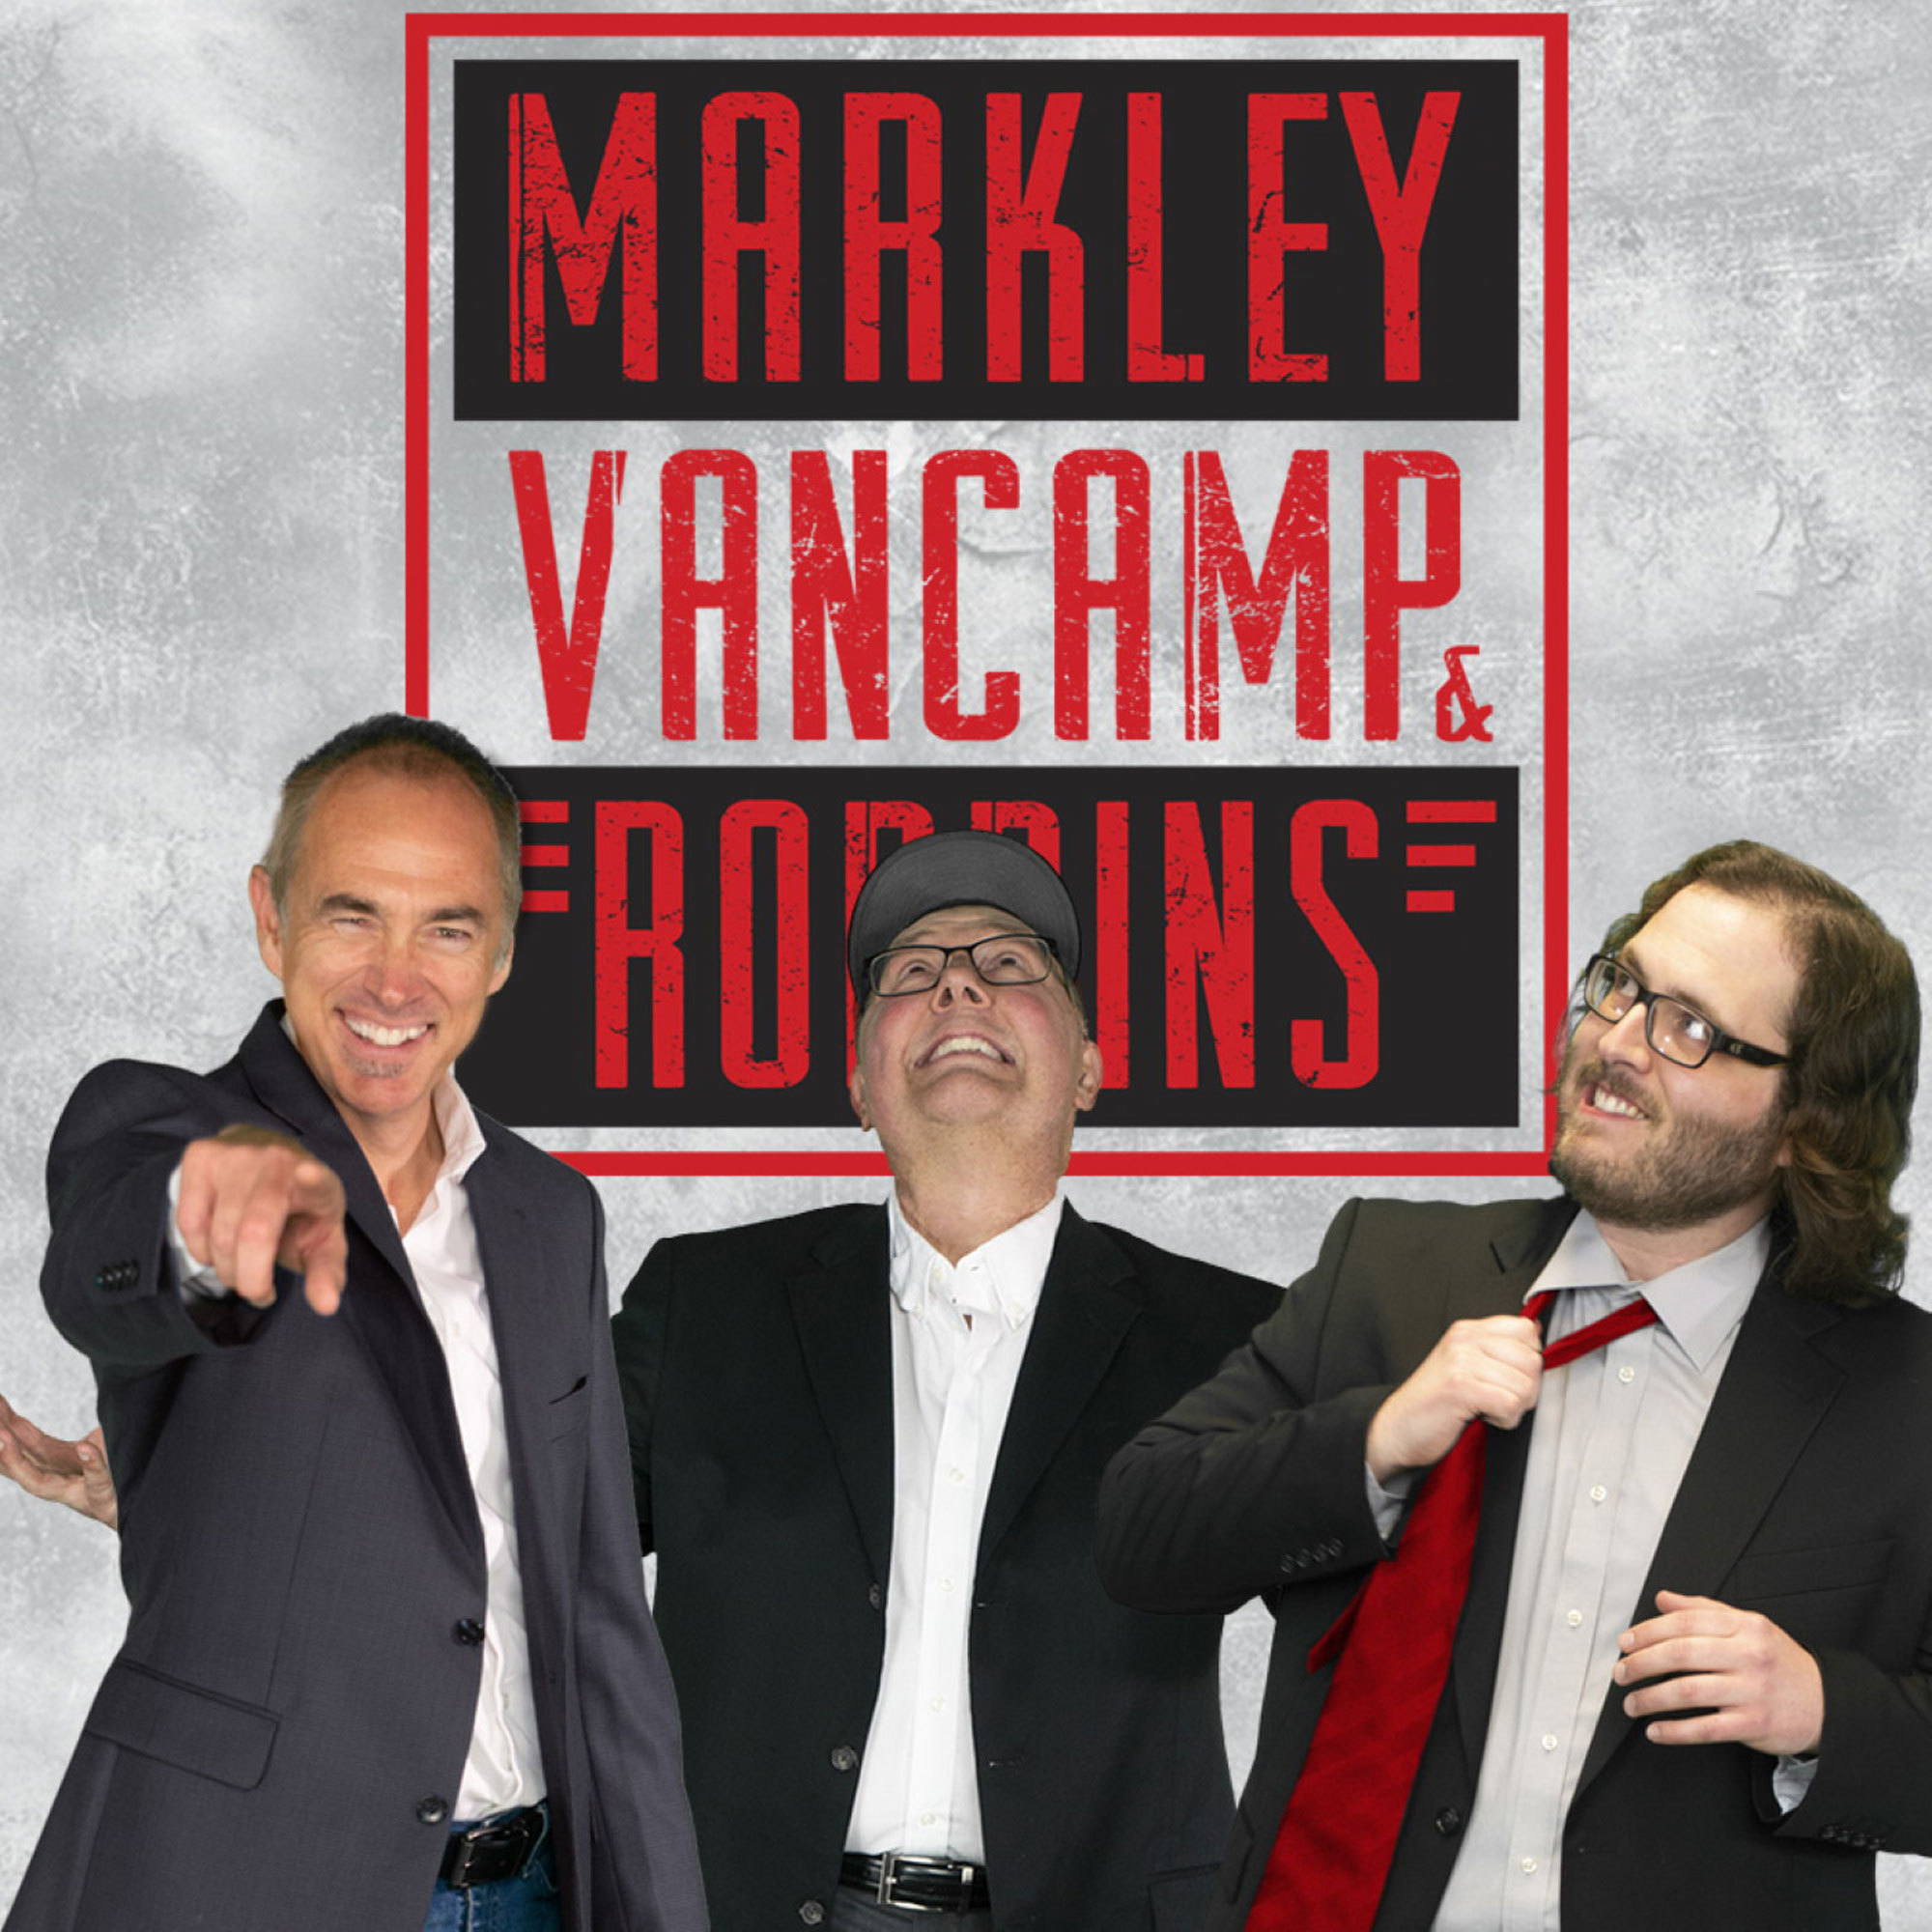 Markley, van Camp and Robbins Podcast Listen, Reviews, Charts Chartable